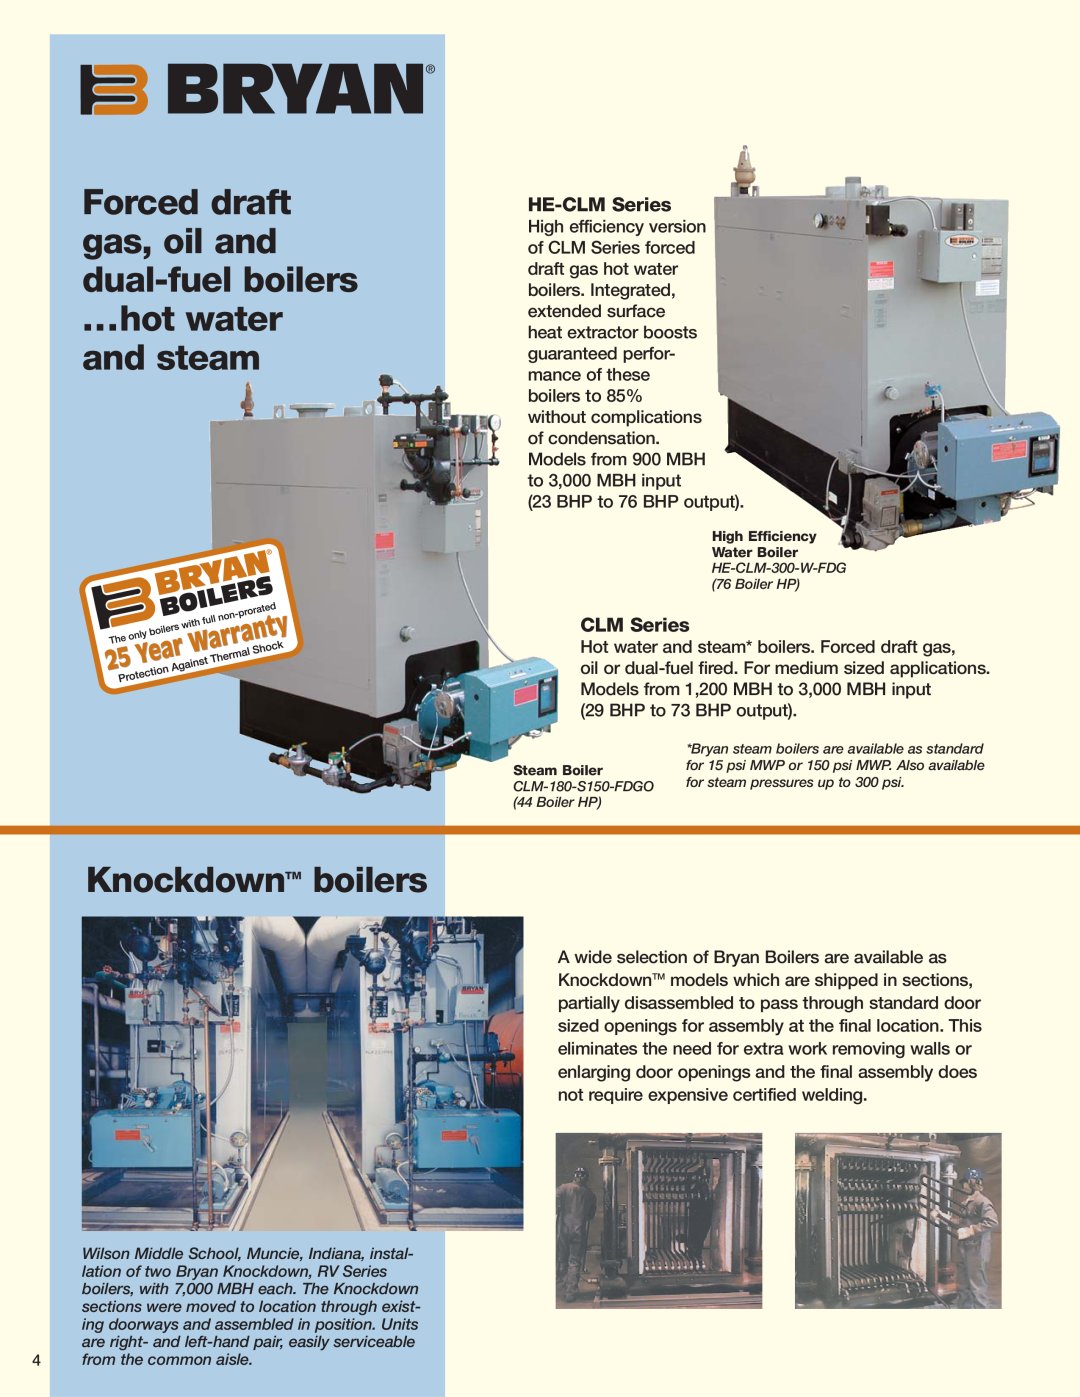 Bryan Boilers Flexible Water Tube Boilers Forced draft gas, oil and dual-fuel boilers hot water and steam, HE-CLM Series 